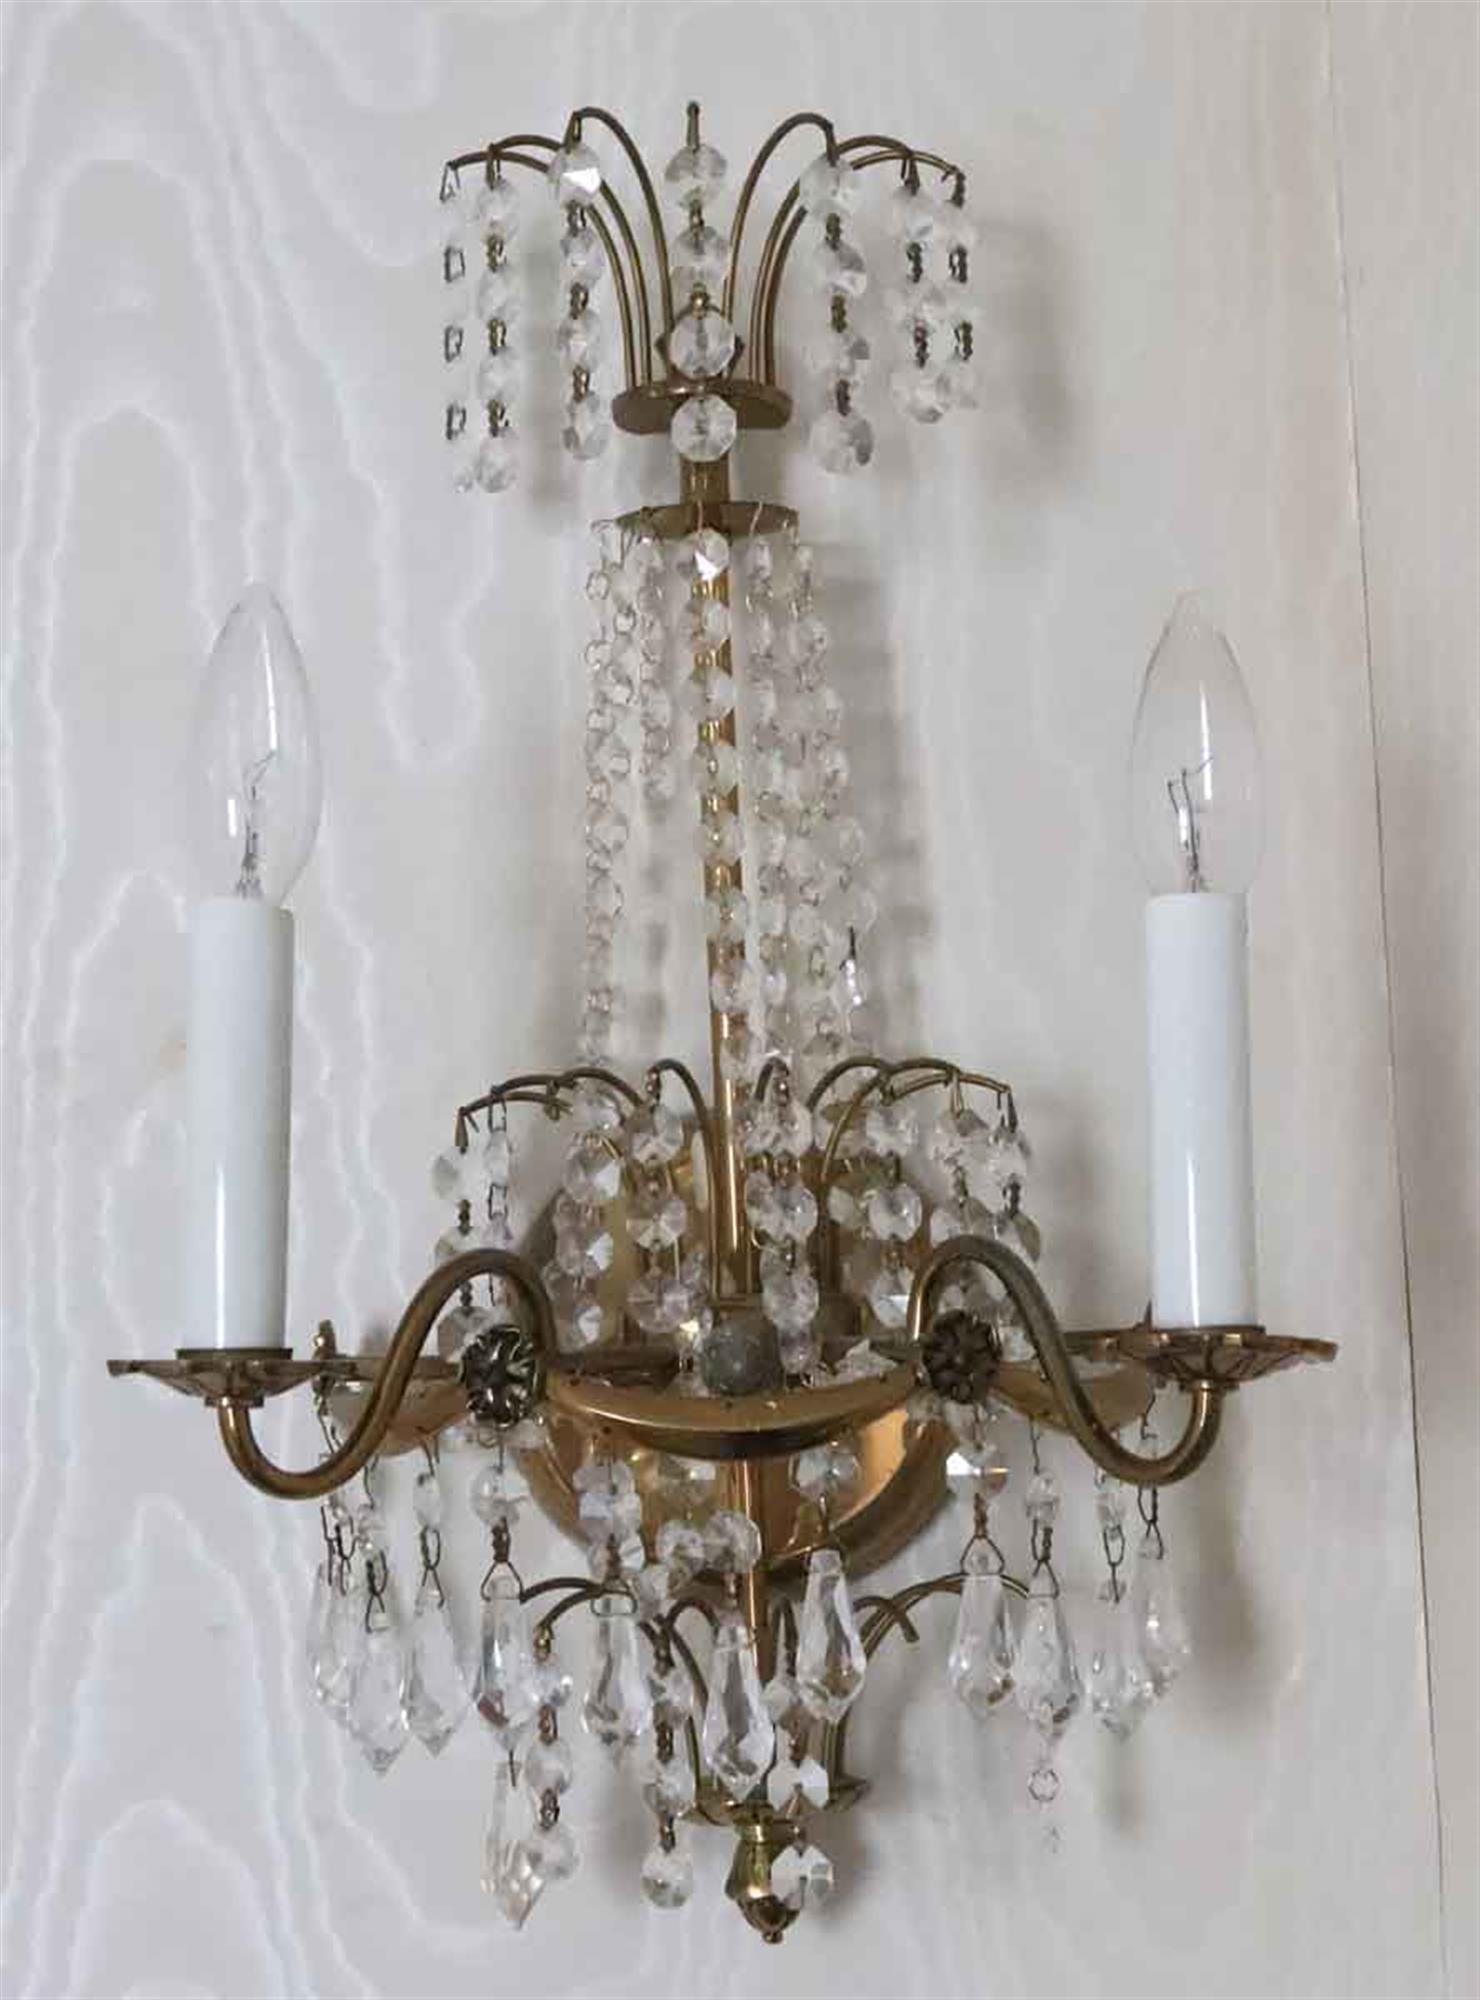 1930s two arm crystal sconces with a brass frame. From the NYC Waldorf Astoria Hotel. Made in Sweden. A Waldorf Astoria authenticity card included with your purchase. Small quantity available at time of posting. Priced each. This can be seen at our